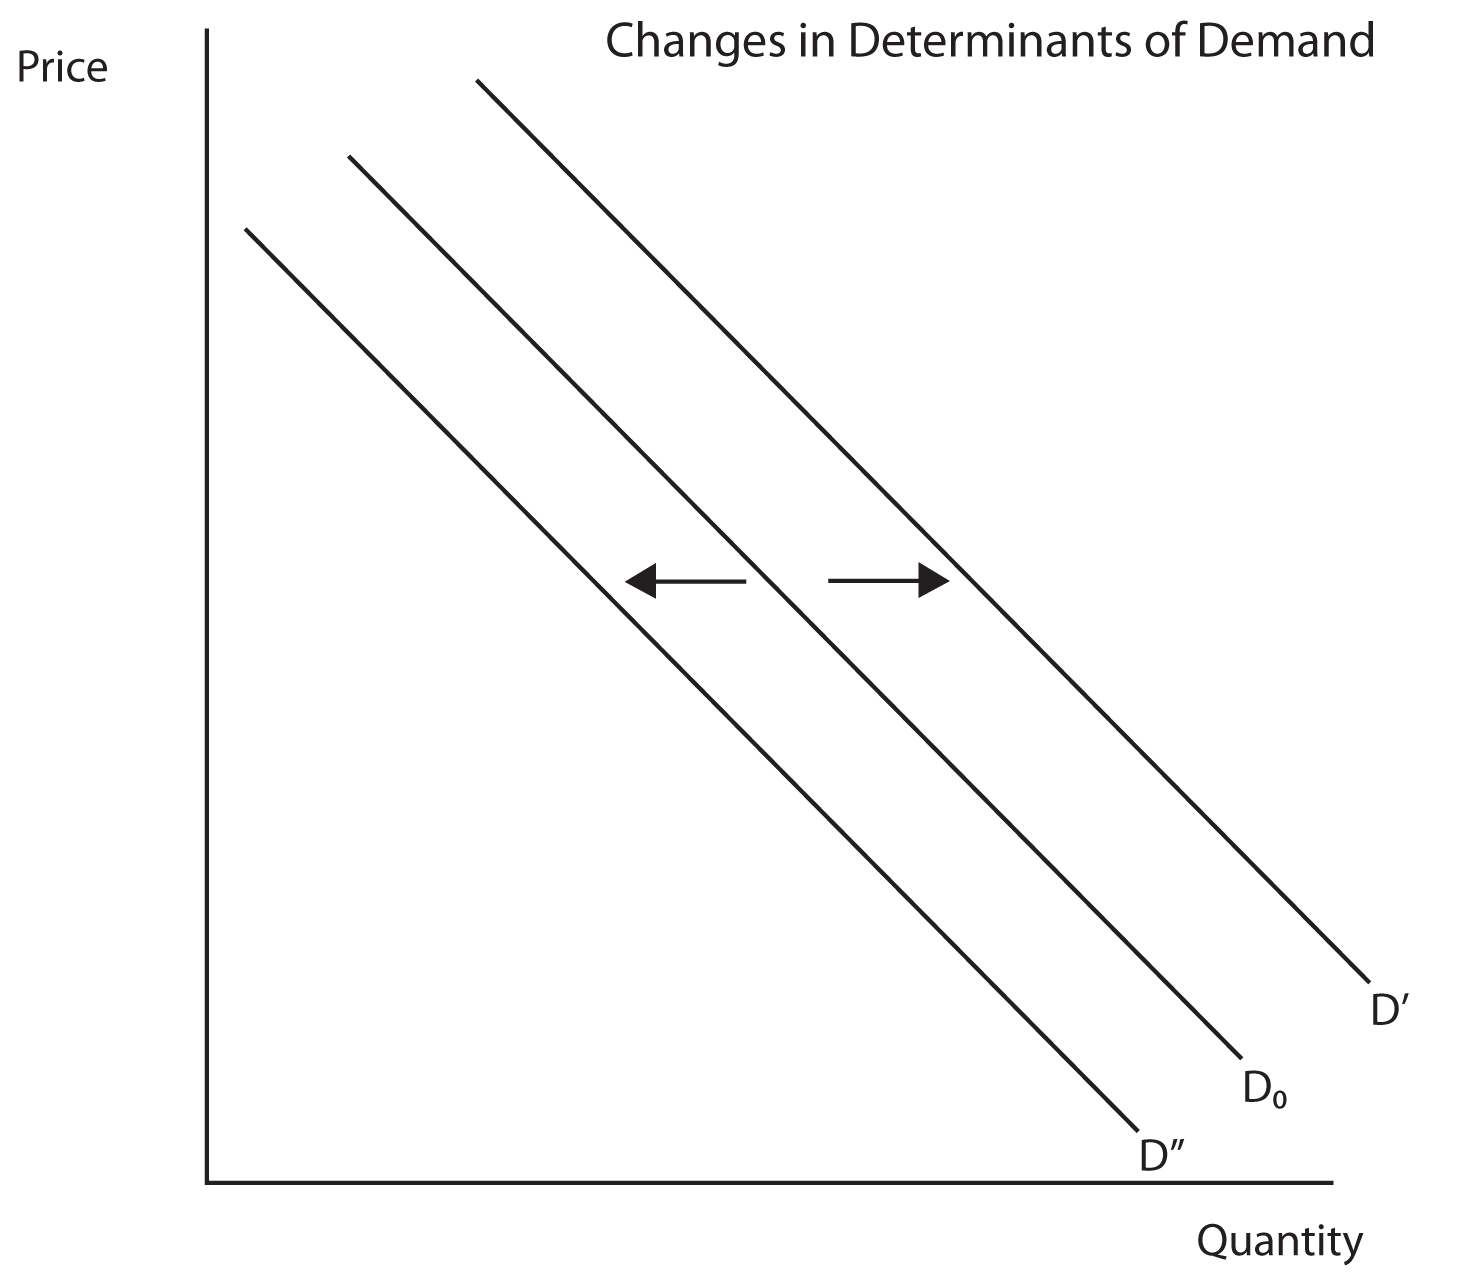 Description: Description: Image 1.07: Changes in Determinants of Demand. This image shows a graph with Price on the Y axis and Quantity on the X axis.  A 45 degree line labeled D0 slopes downward from the Y axis to the X axis.  A parallel line to its right is labeled D Prime (representing an increase in demand) and a parallel line to its left is labeled D Prime Prime (representing a decrease in demand).  